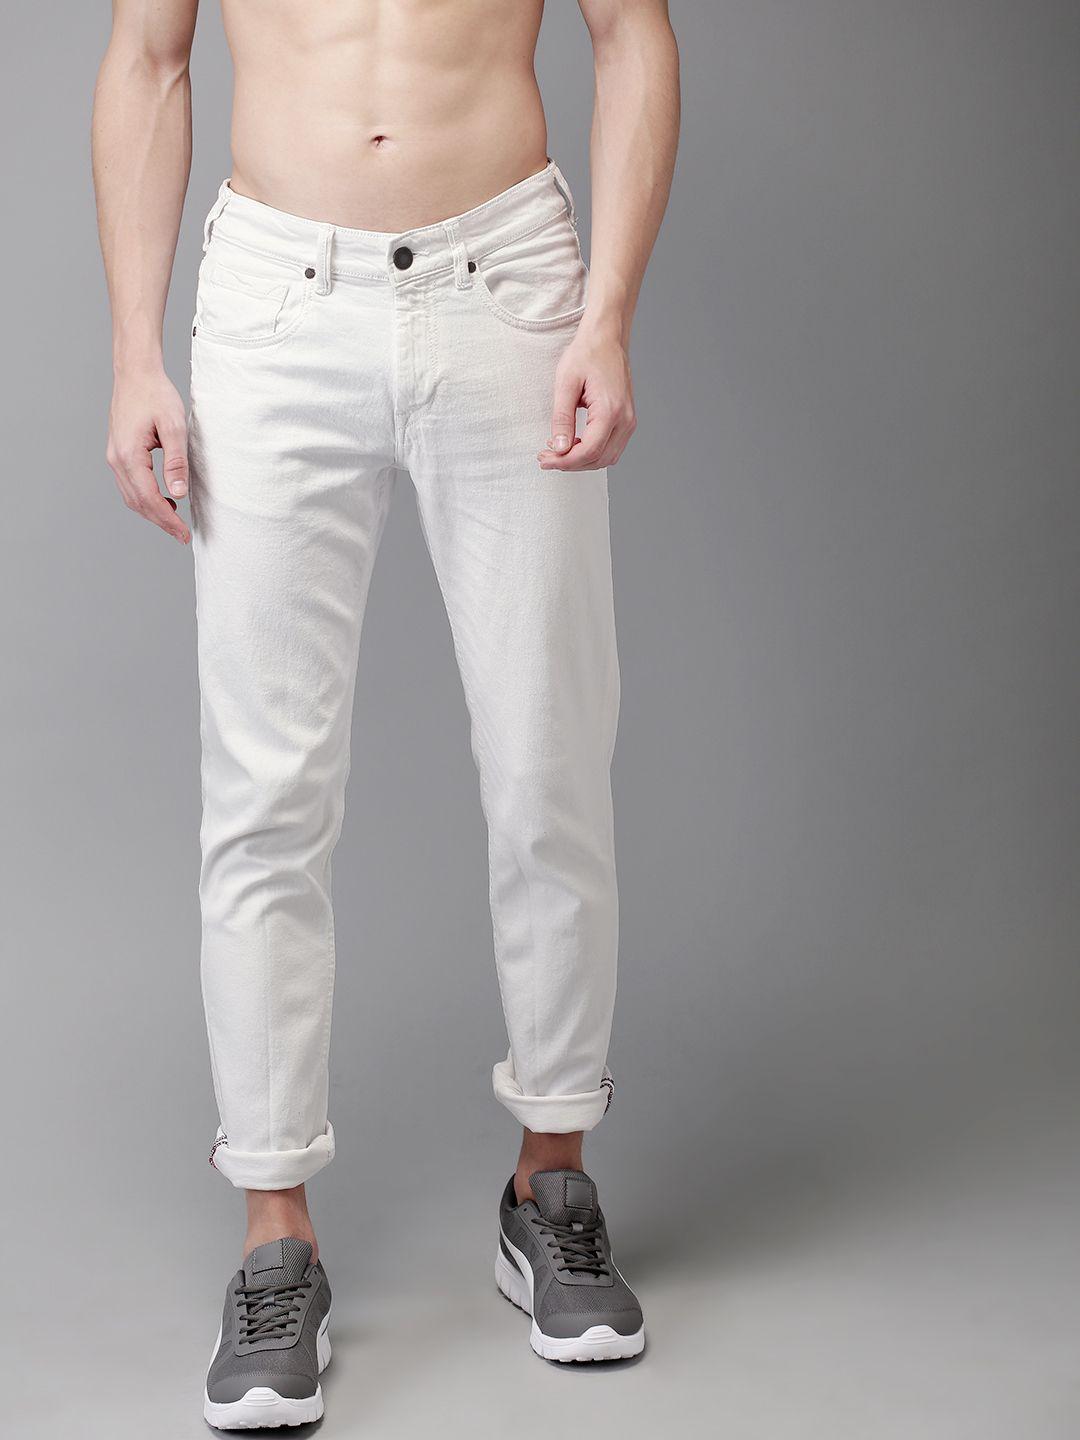 here&now men white skinny fit mid-rise clean look stretchable jeans